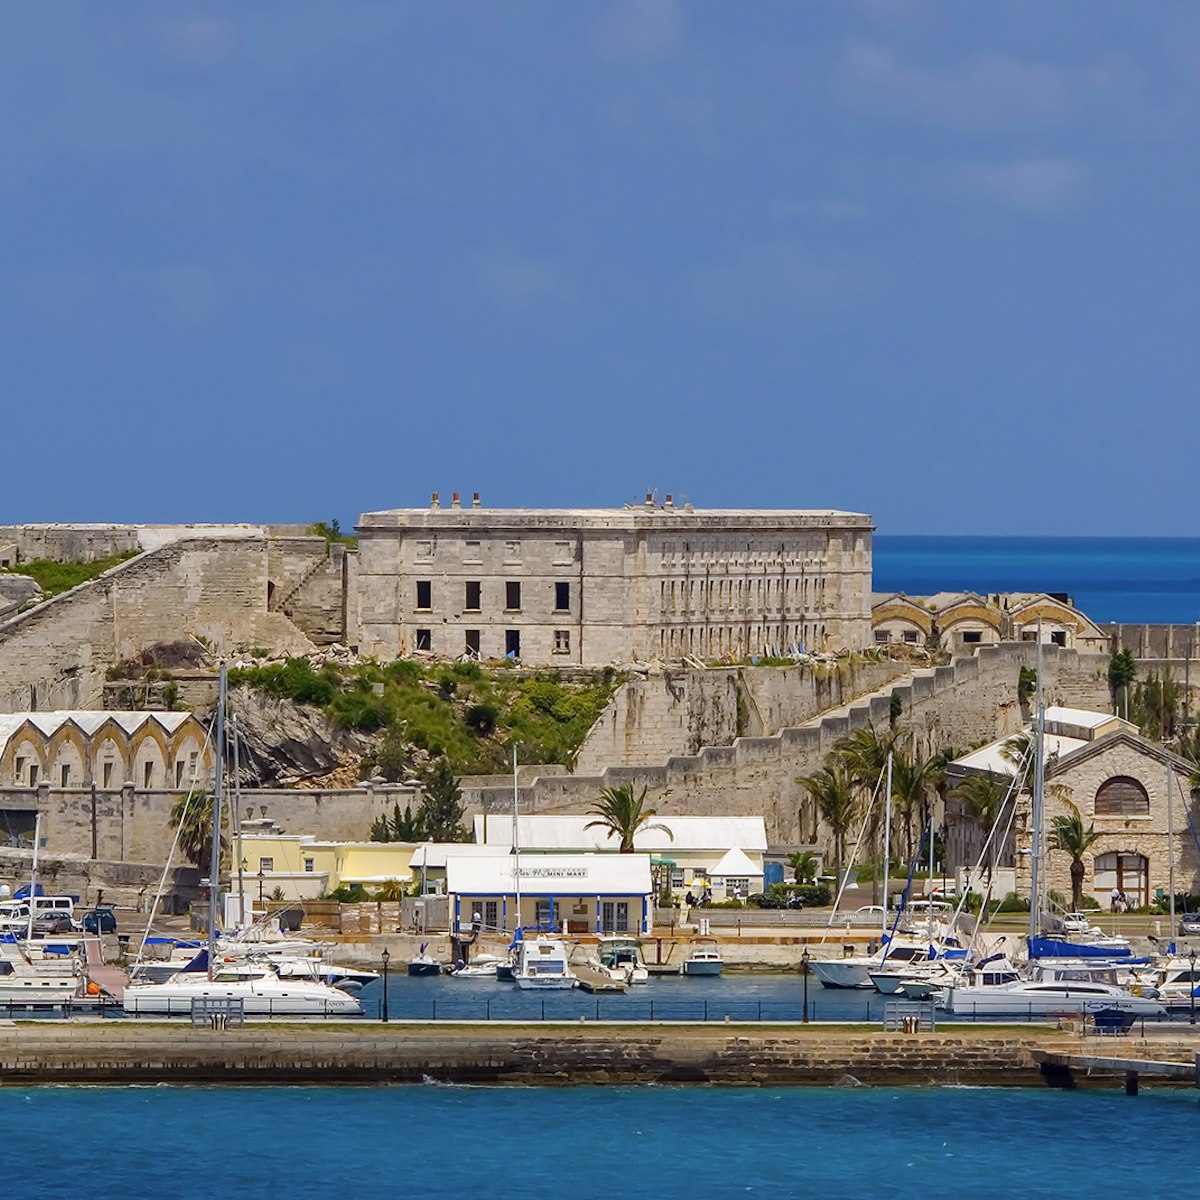 View from cruise ship of West End and marina at old Royal Naval Dockyard, Bermuda.